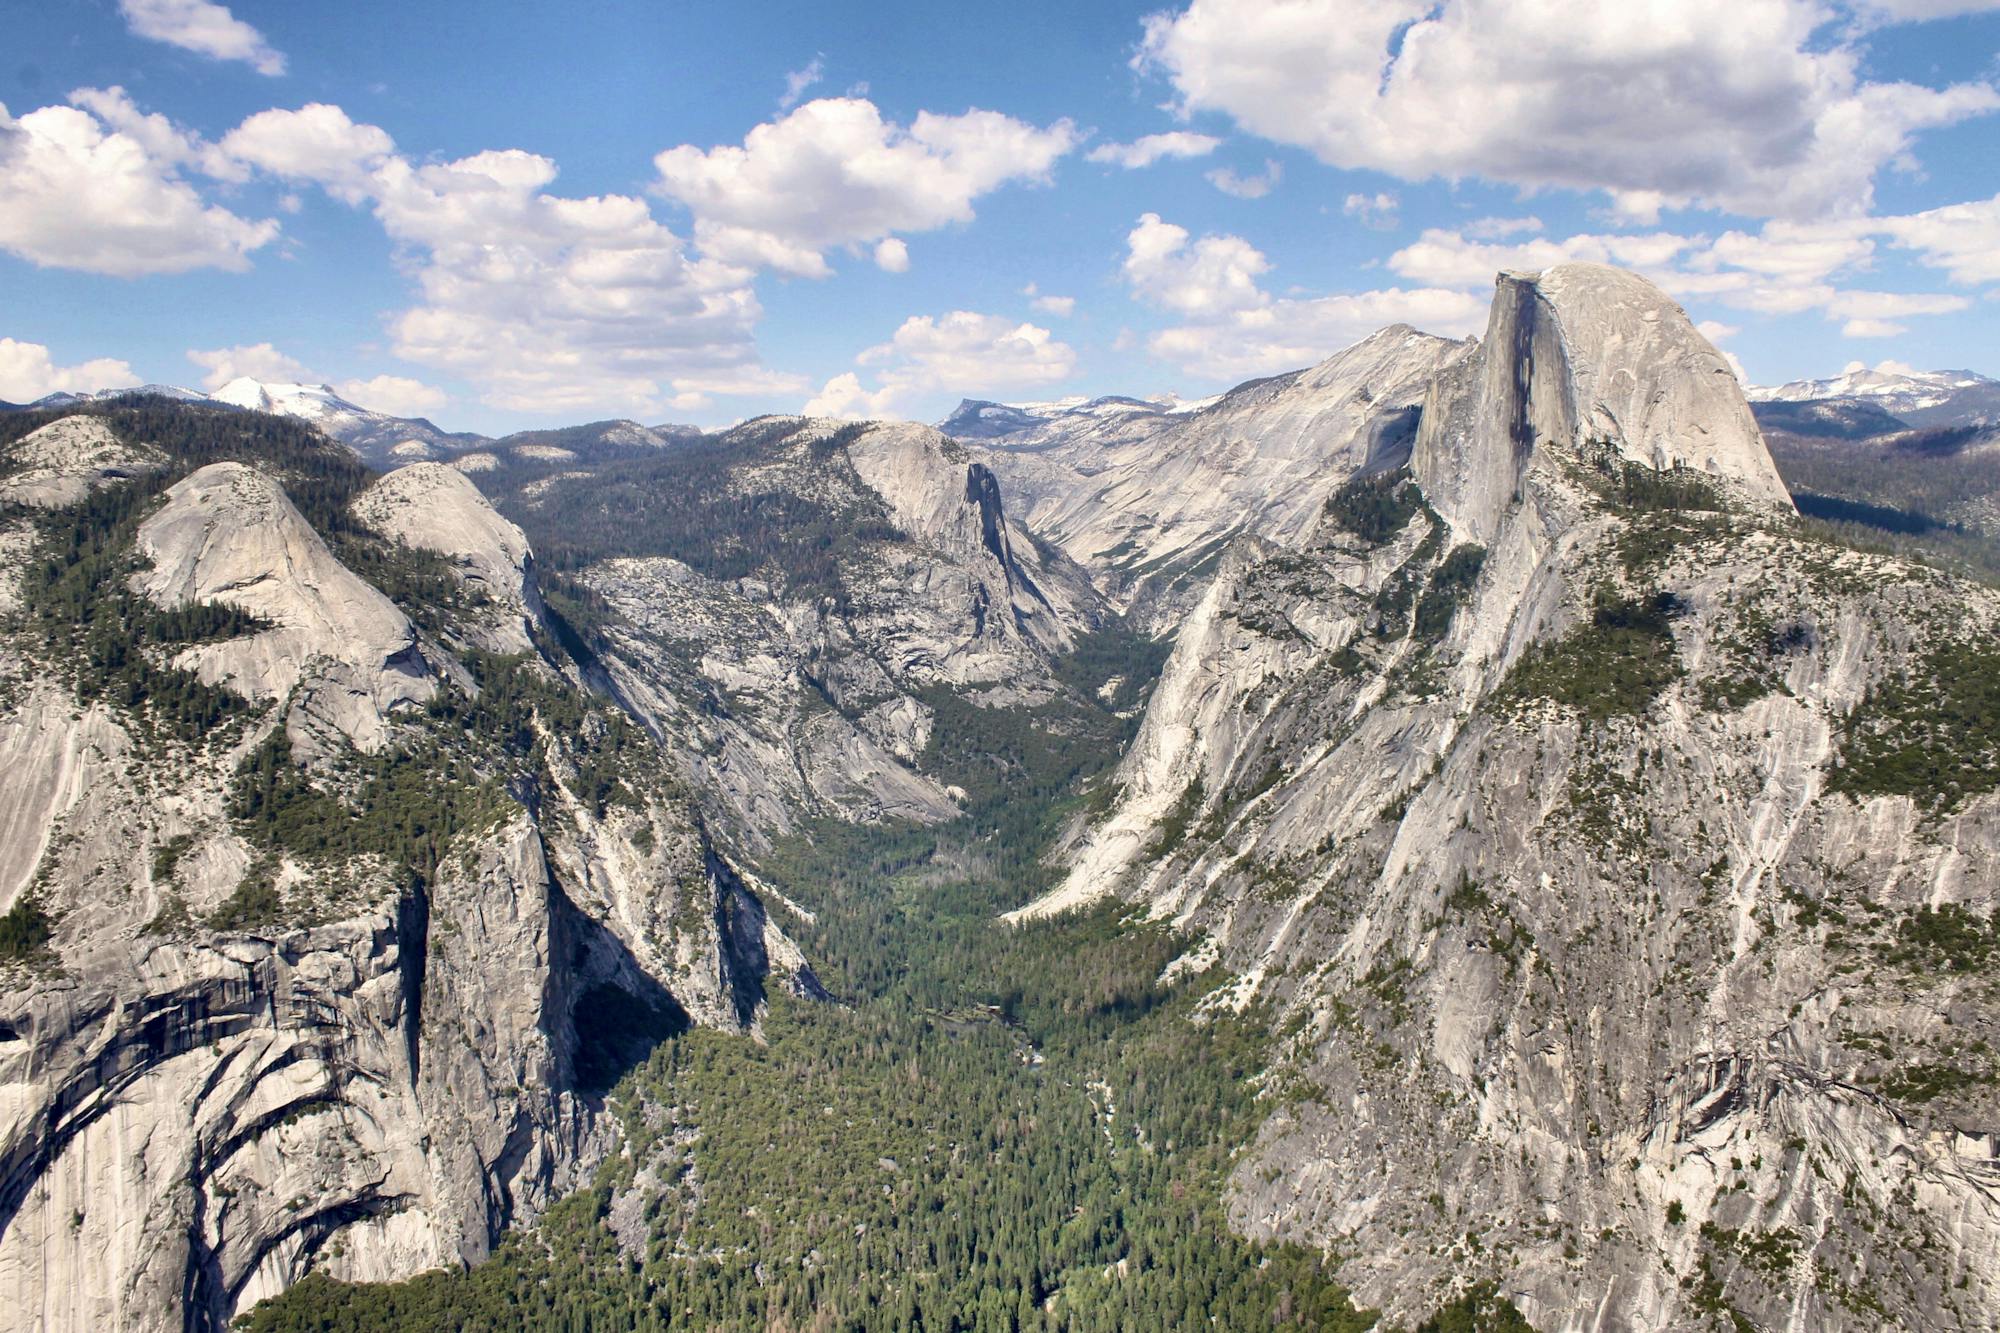 Yosemite Valley, as seen from Glacier Point